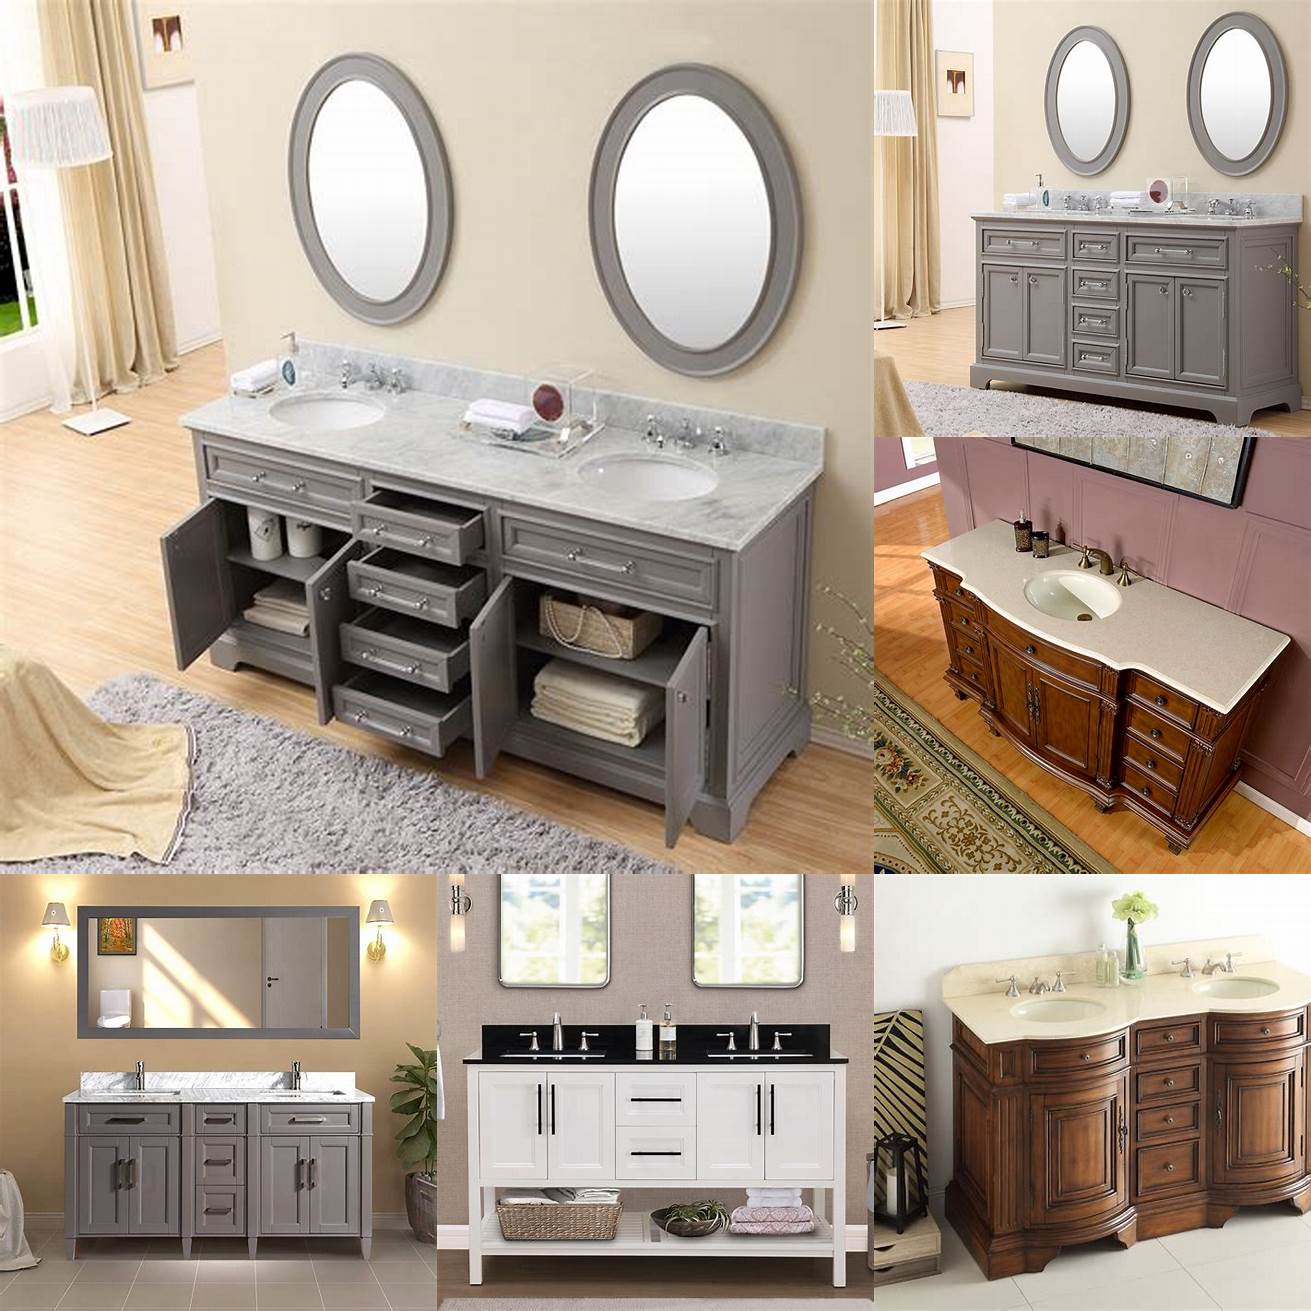 Image of a traditional 60 inch bathroom vanity